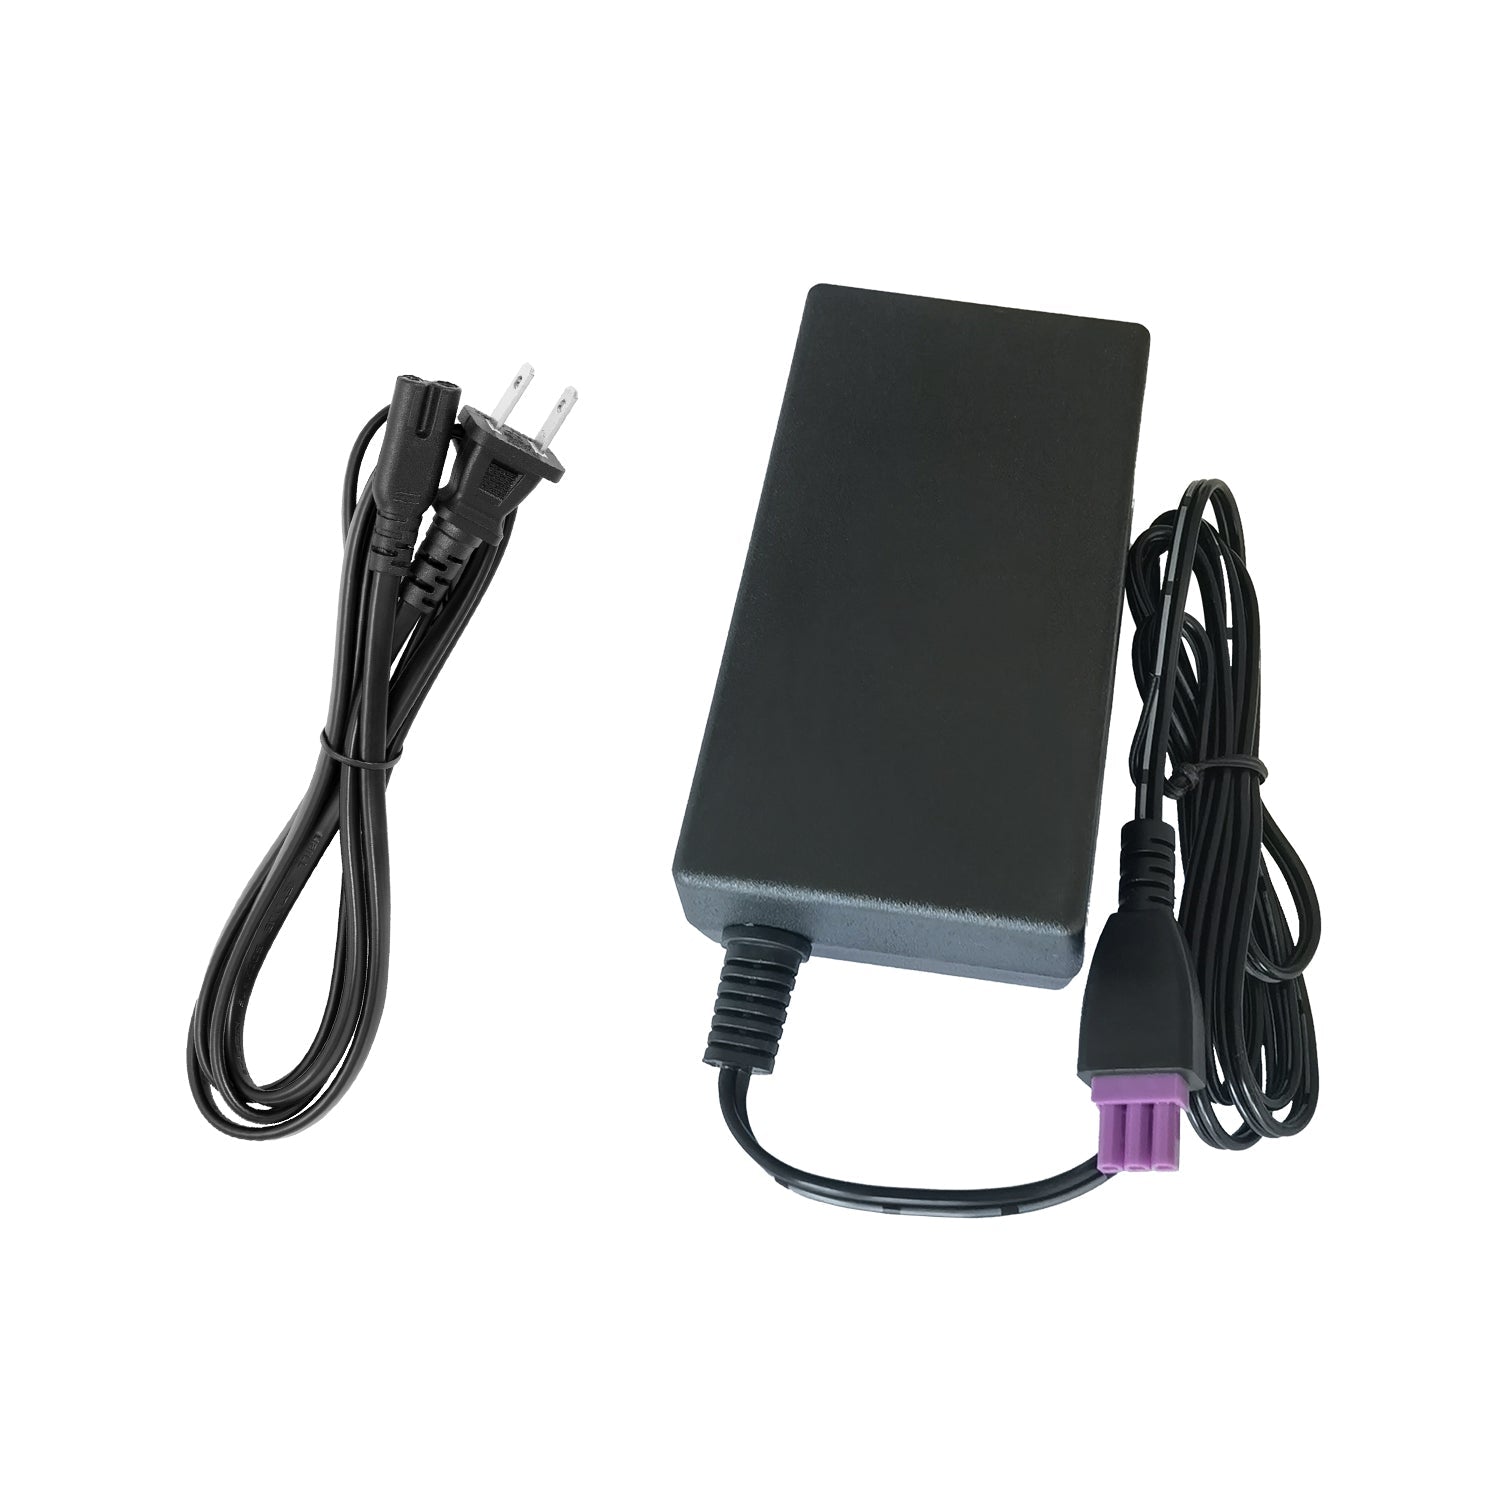 Power Adapter for HP 0957-2289 Printer.